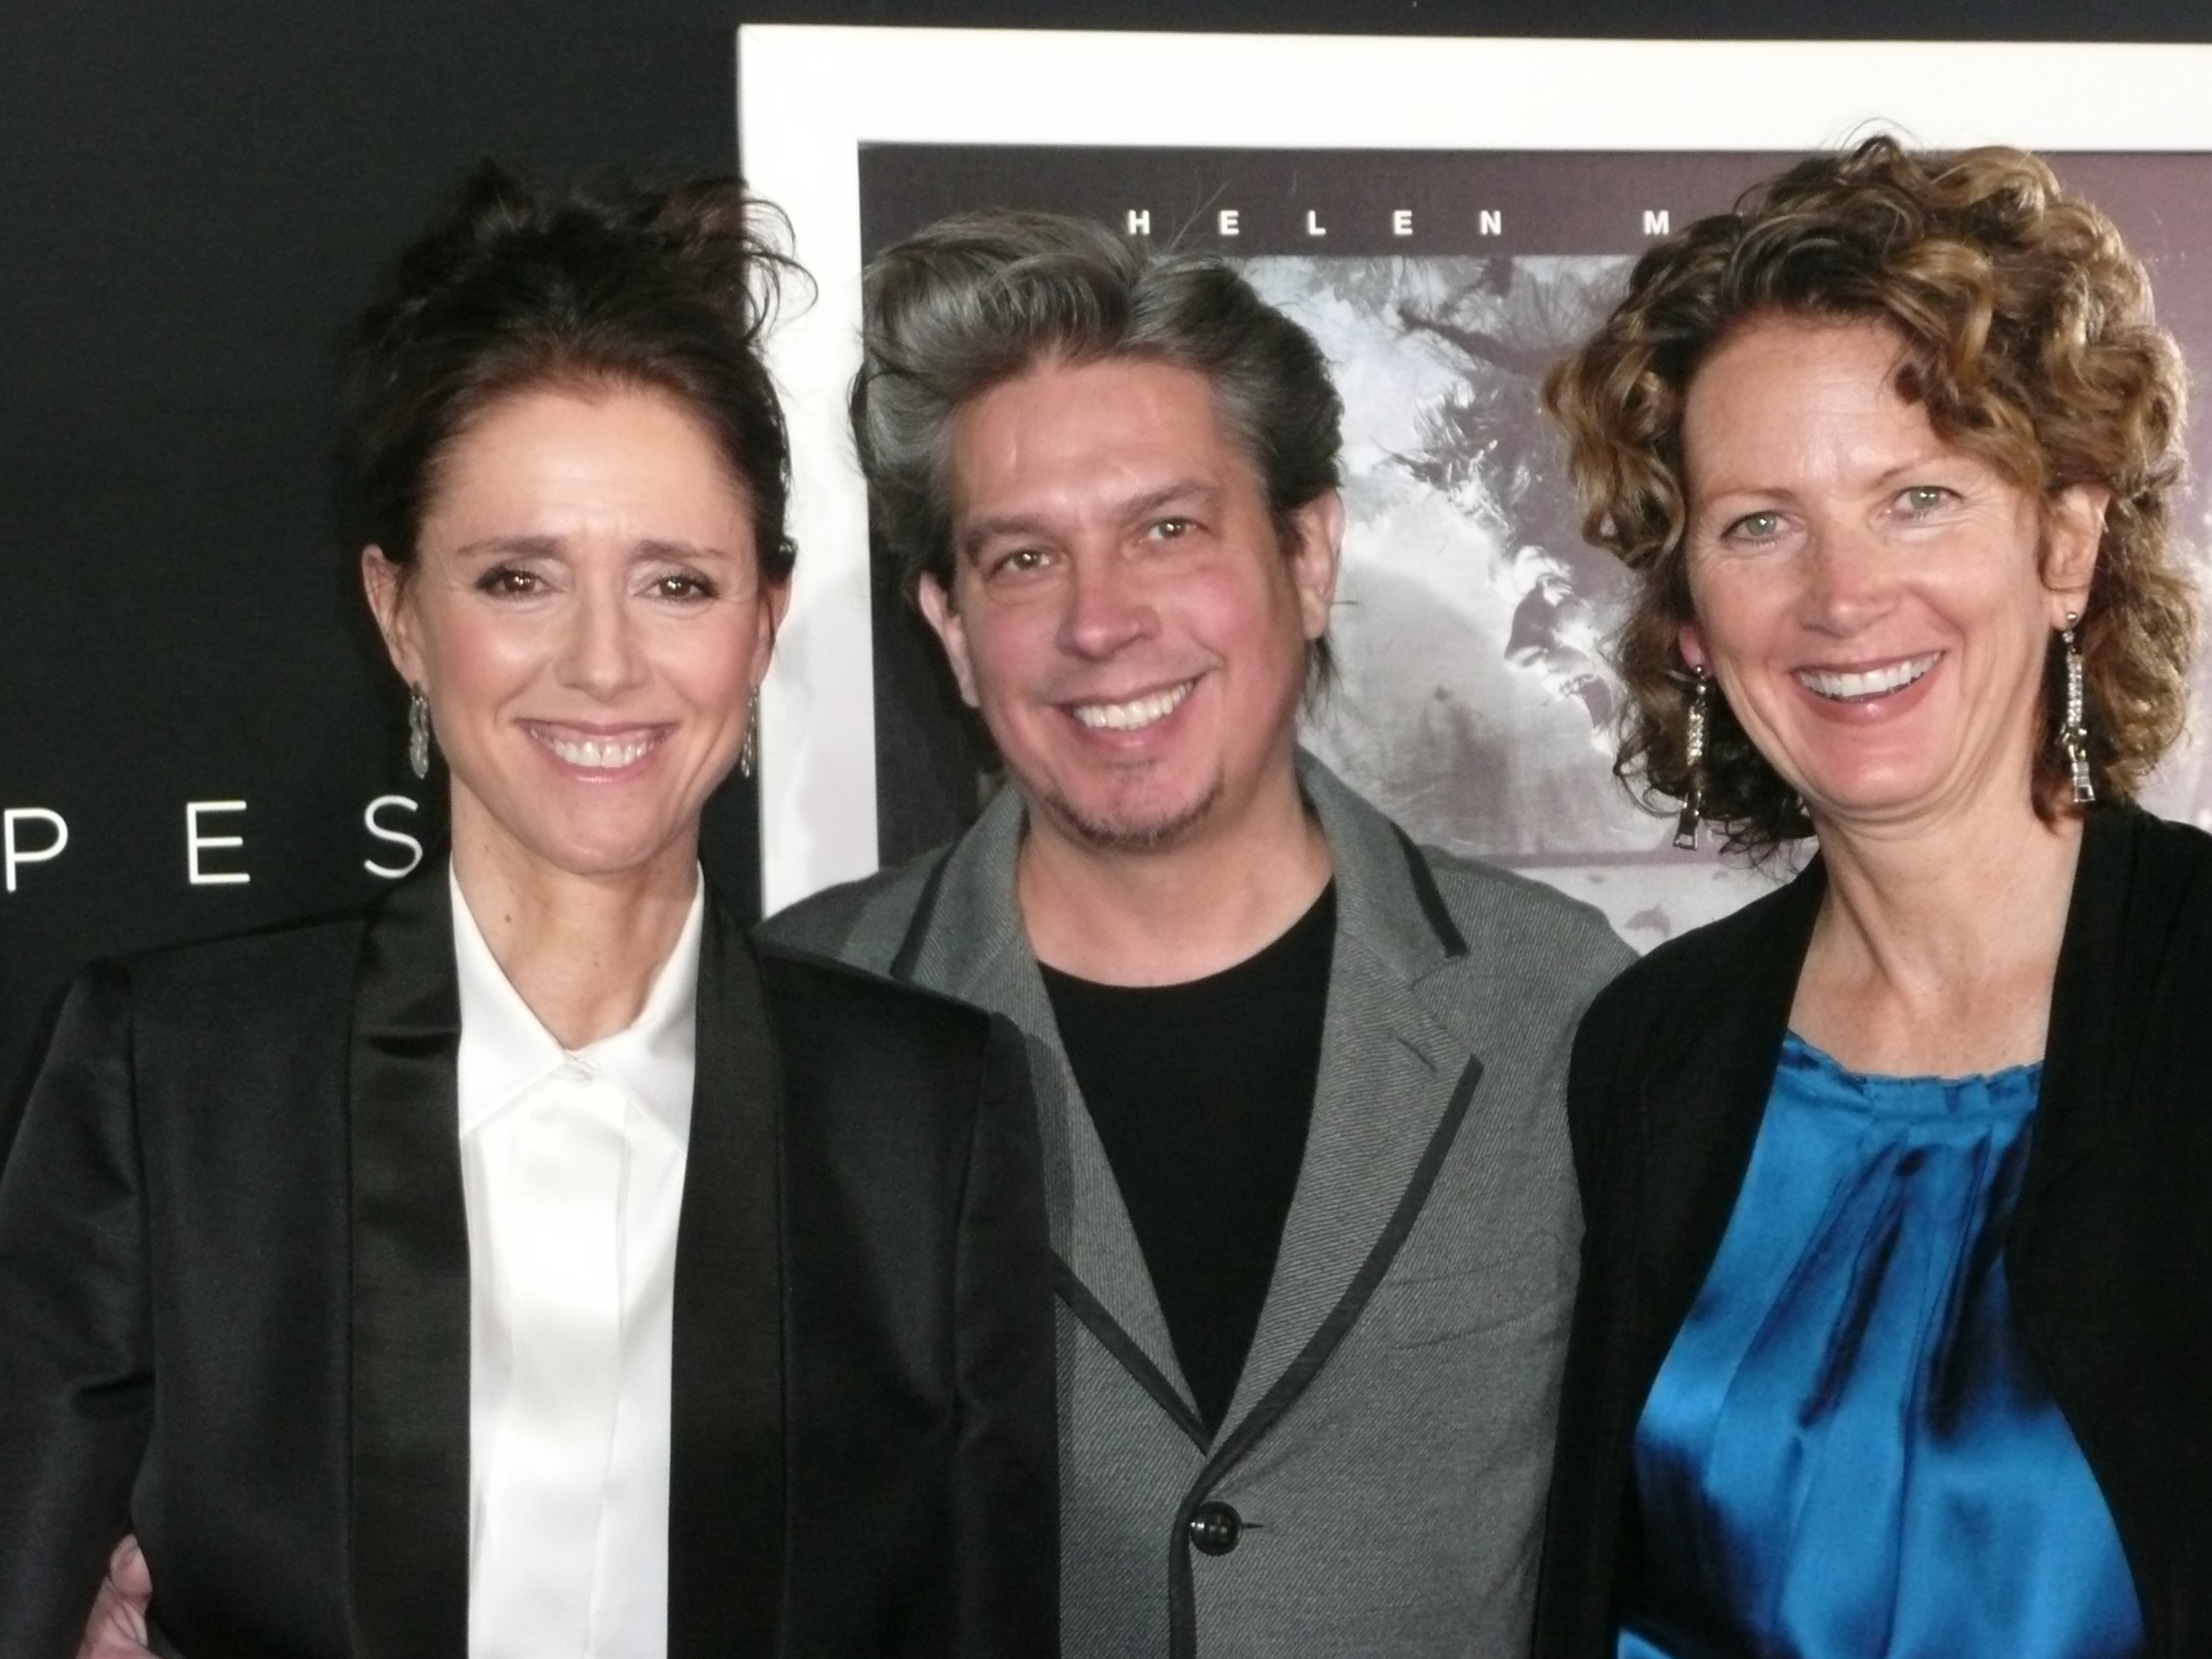 Julie Taymor, Elliot Goldenthal and Lynn Hendee at Los Angeles Premiere of 'The Tempest'